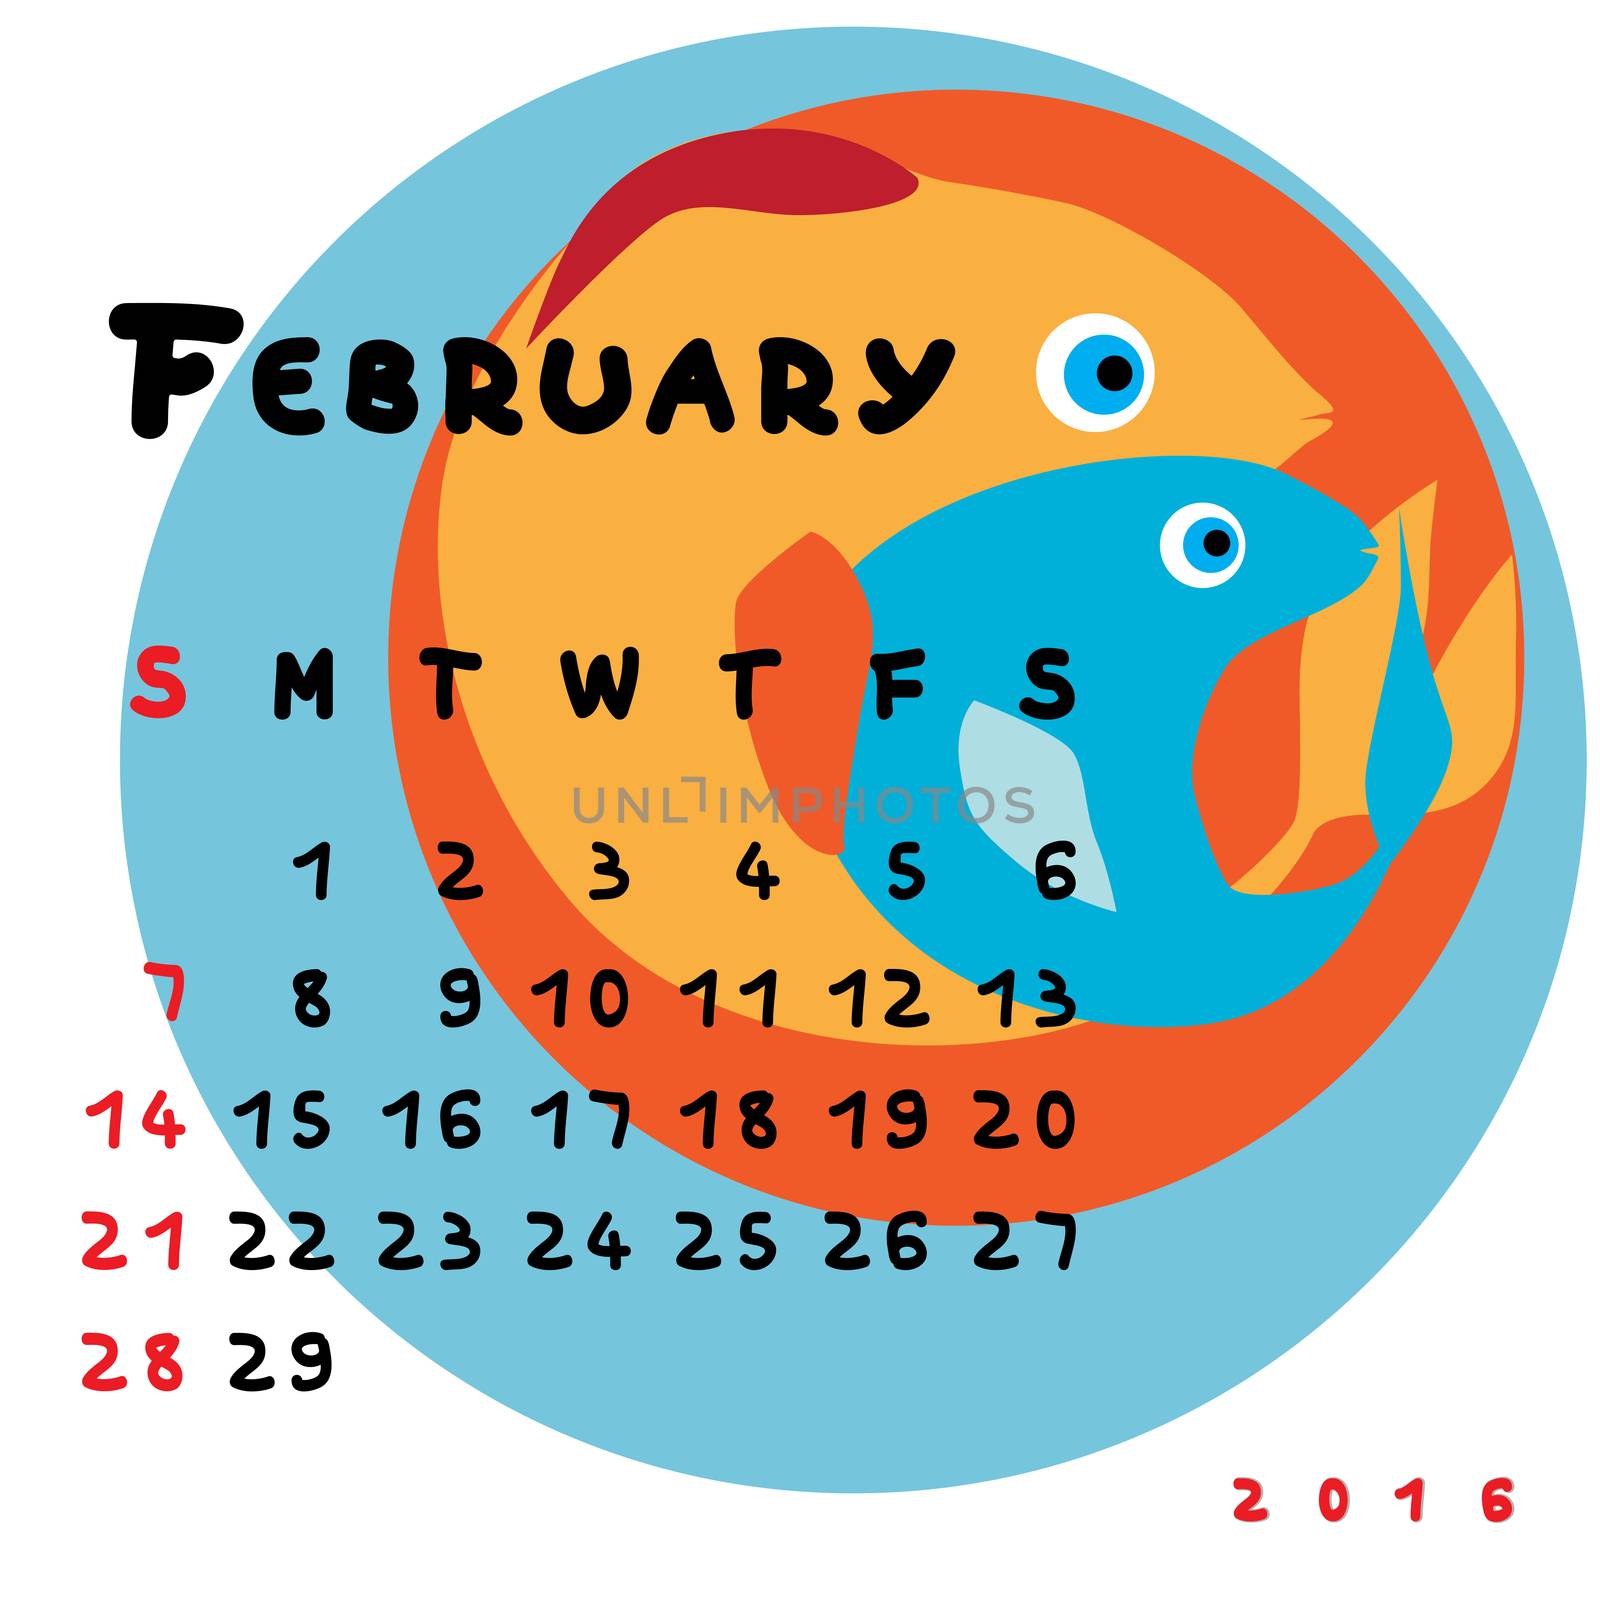 2016 february pisces by catacos